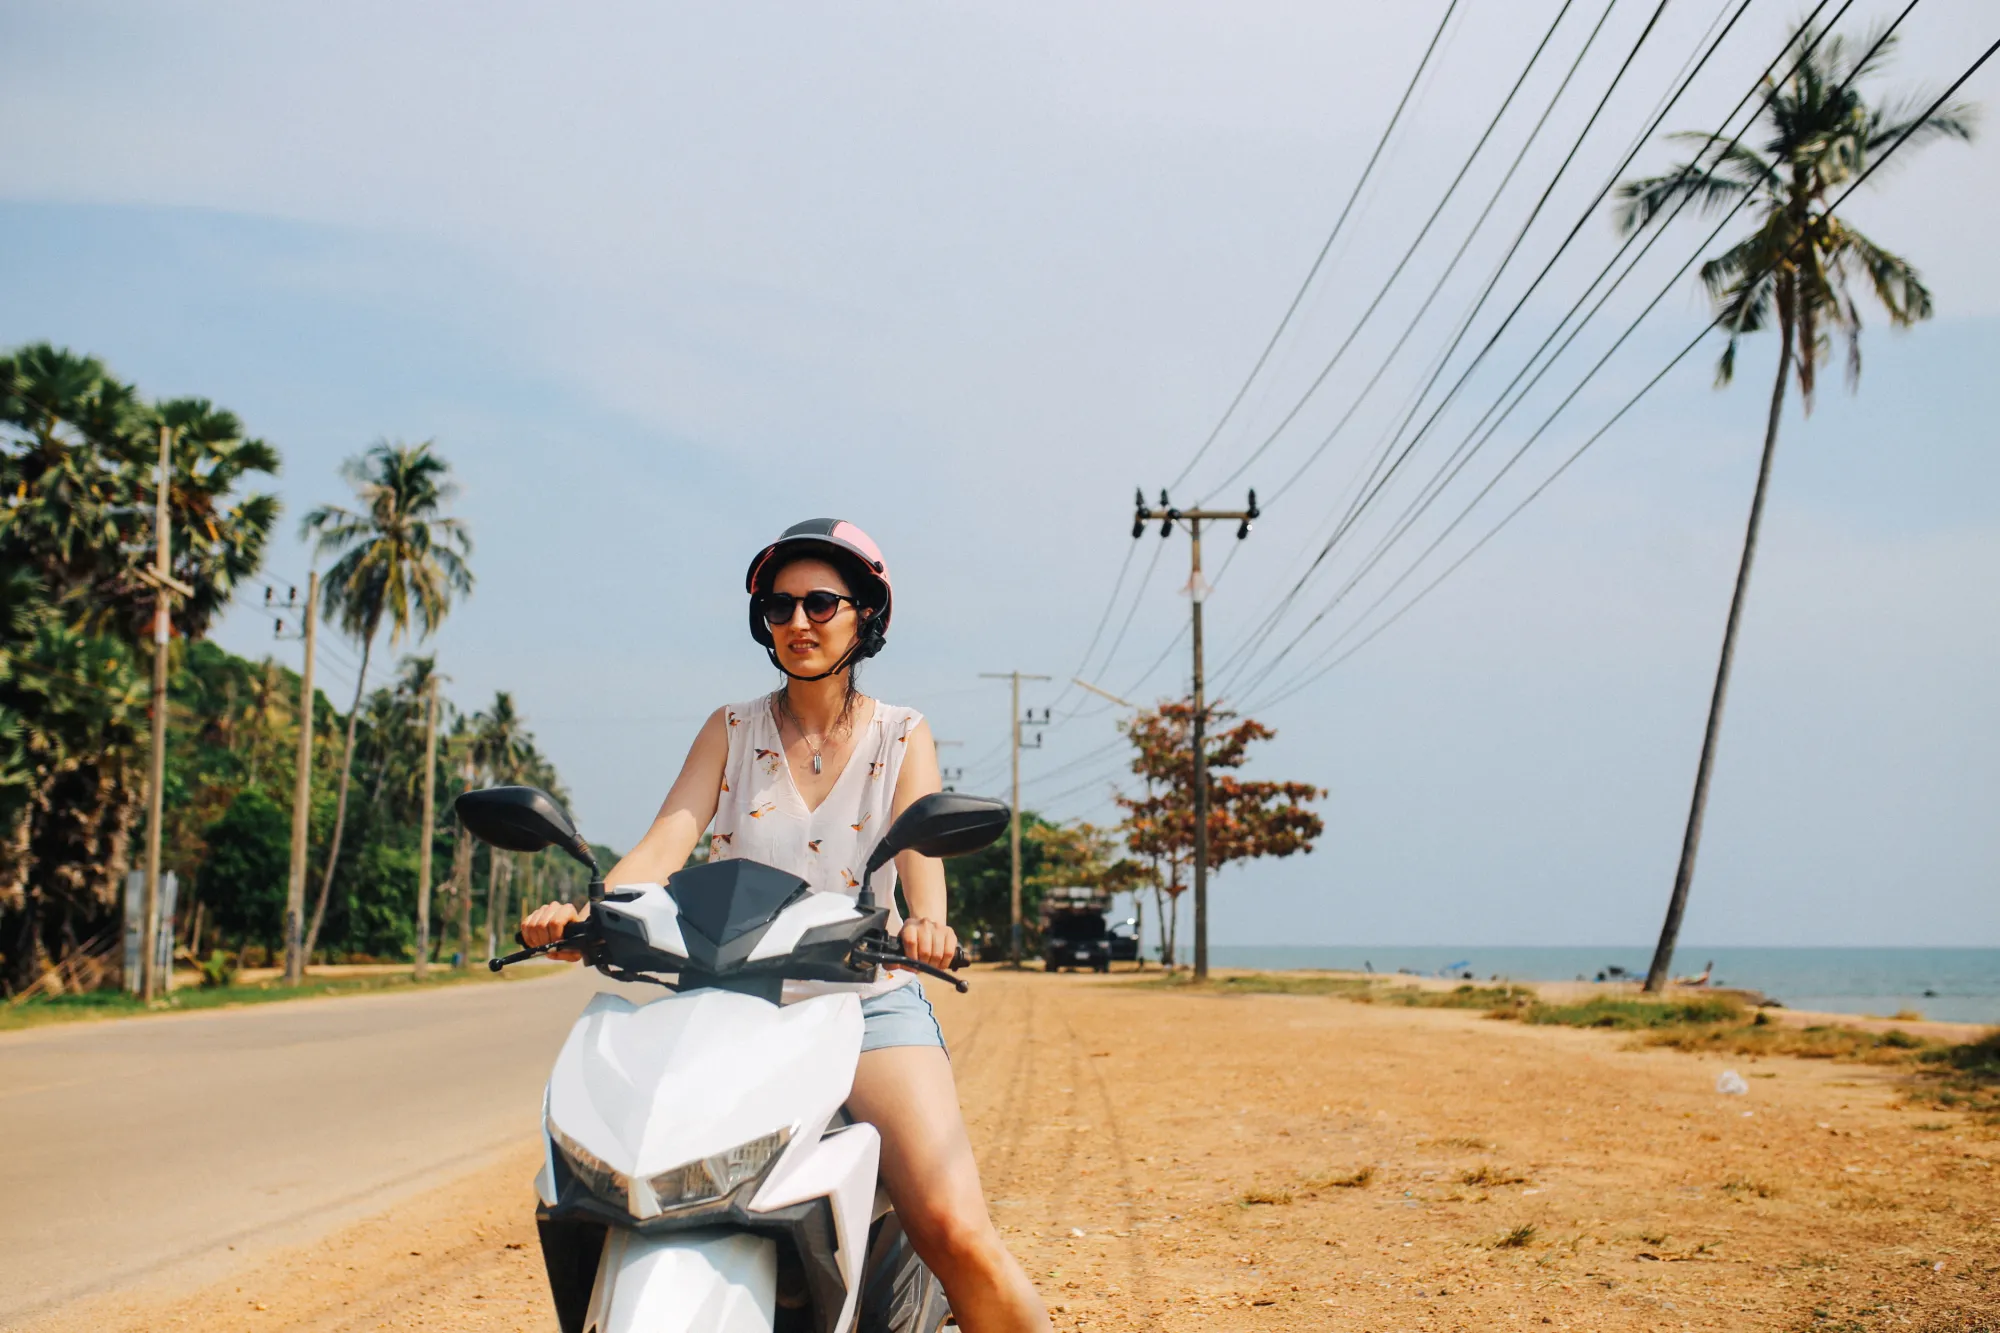 Image of a woman on a scooter in Koh Lanta, Thailand